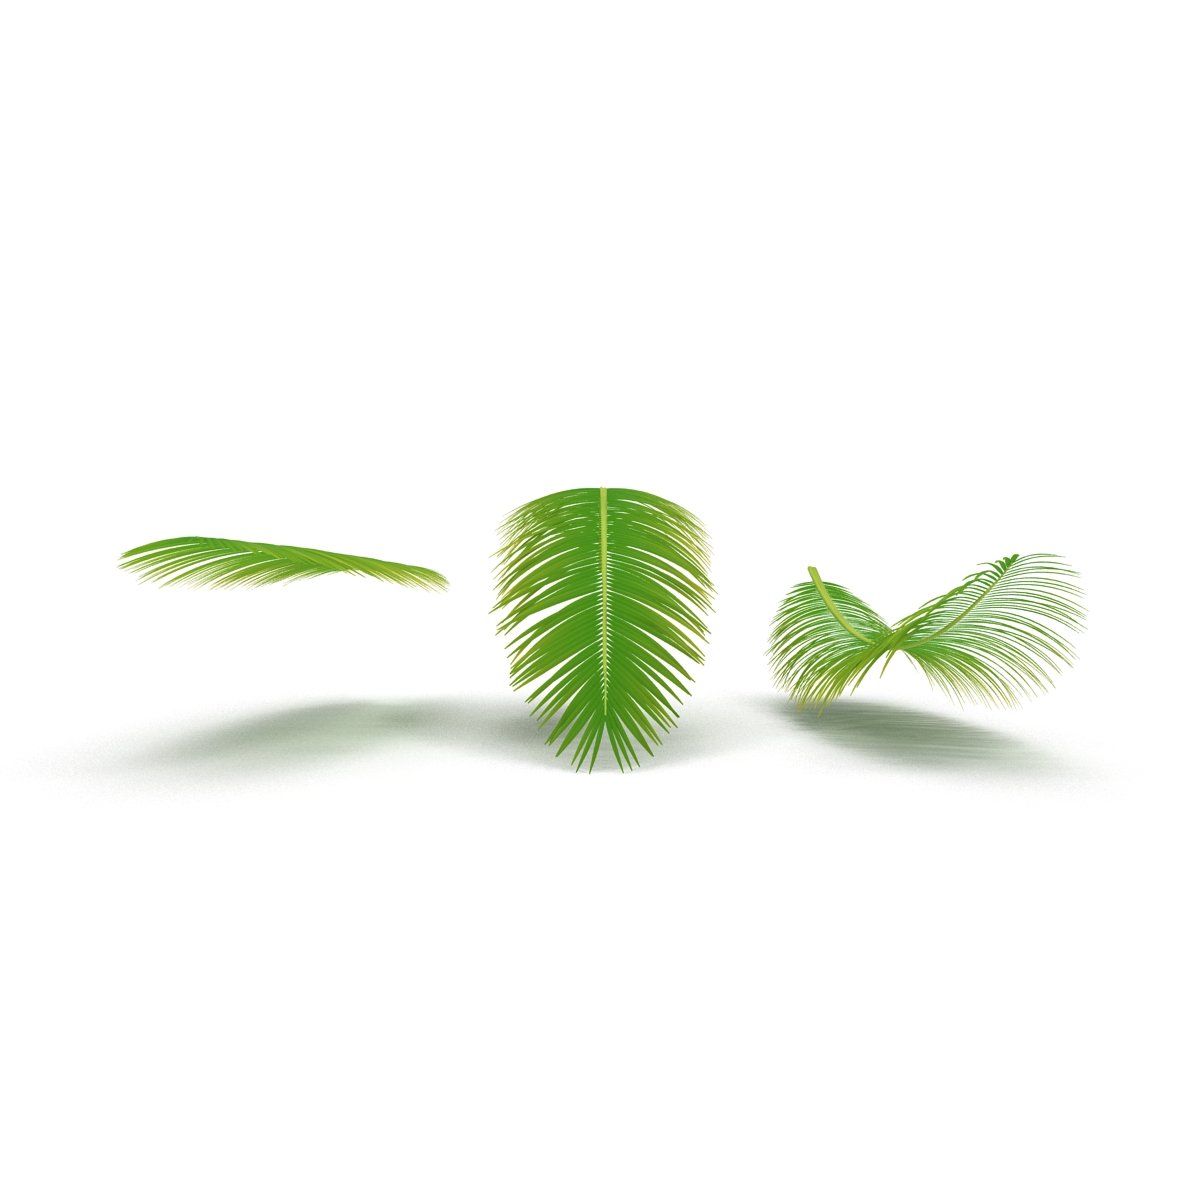 Two green leaves on a white background.